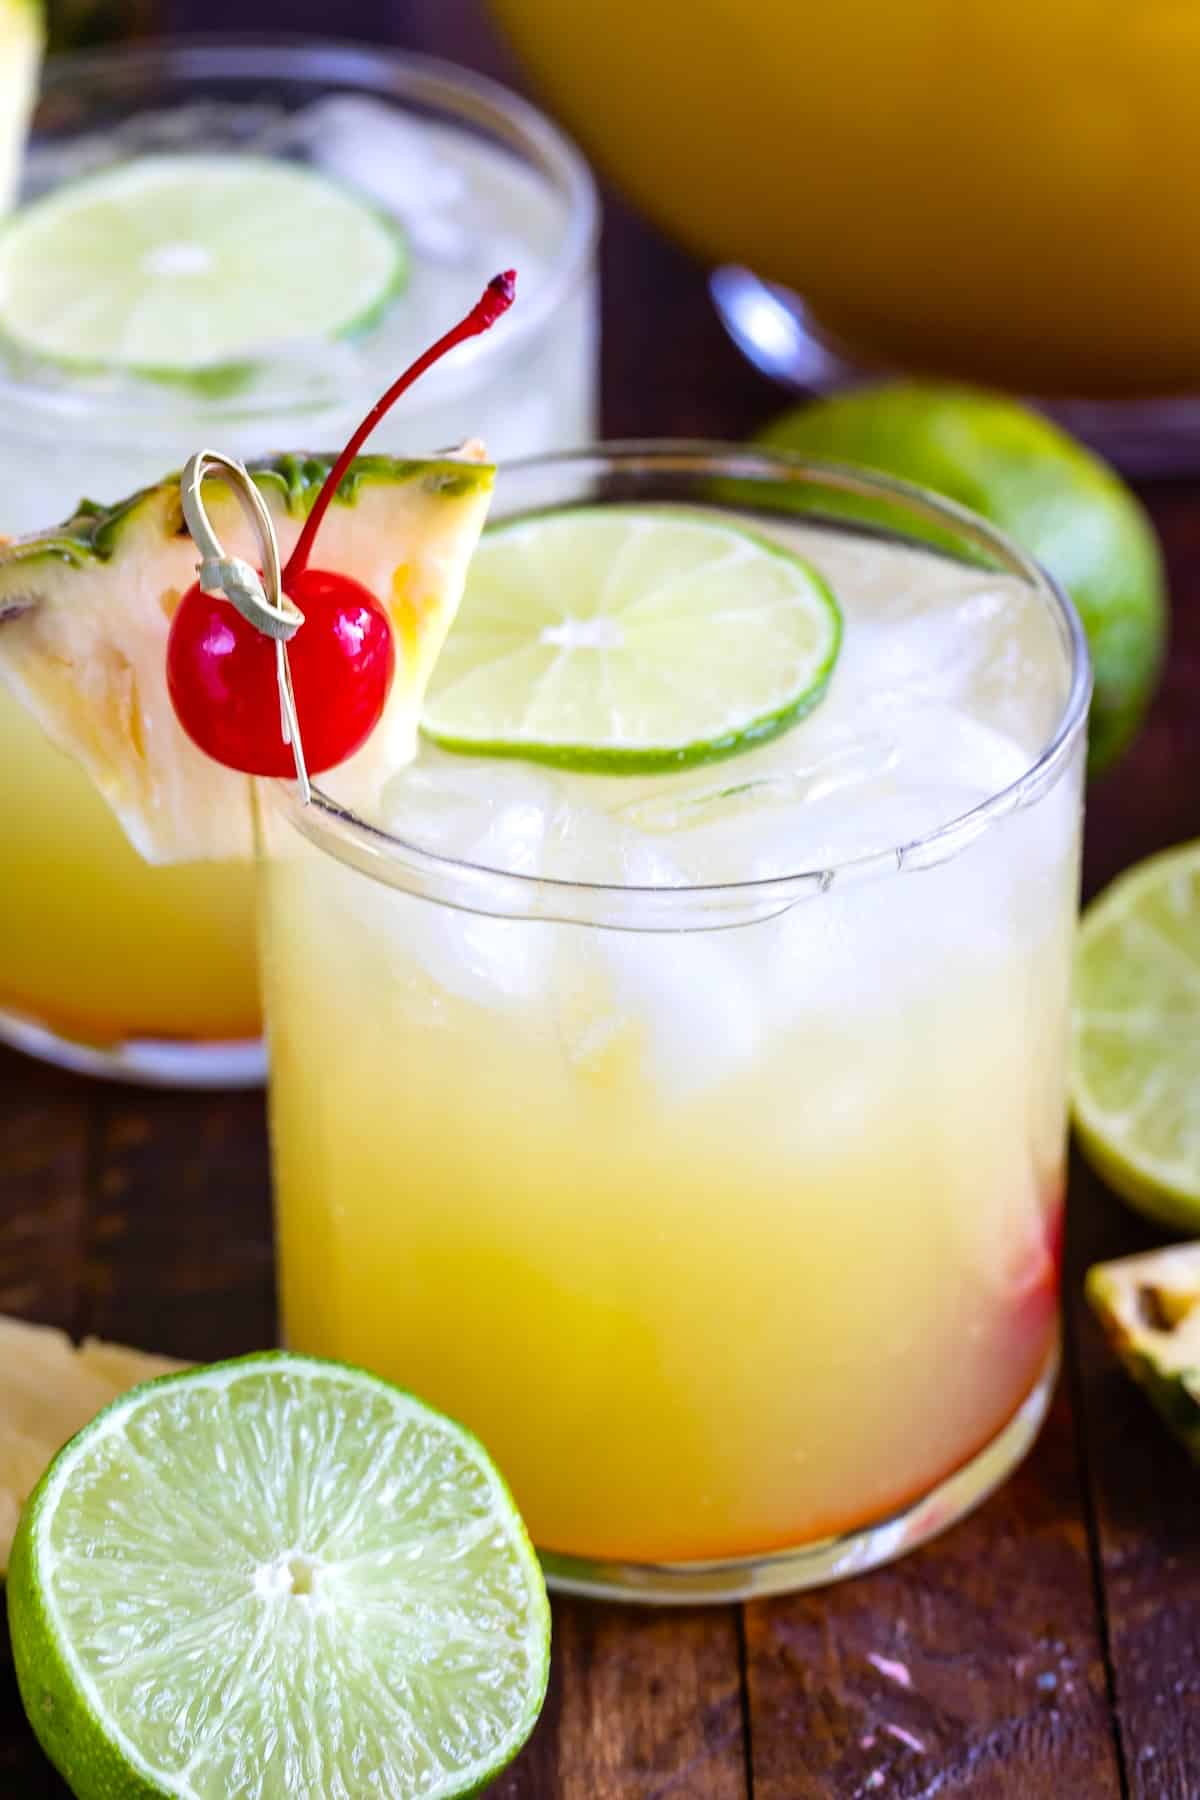 yellow drink in a short clear glass with cherries and pineapple slices and limes on the rim.